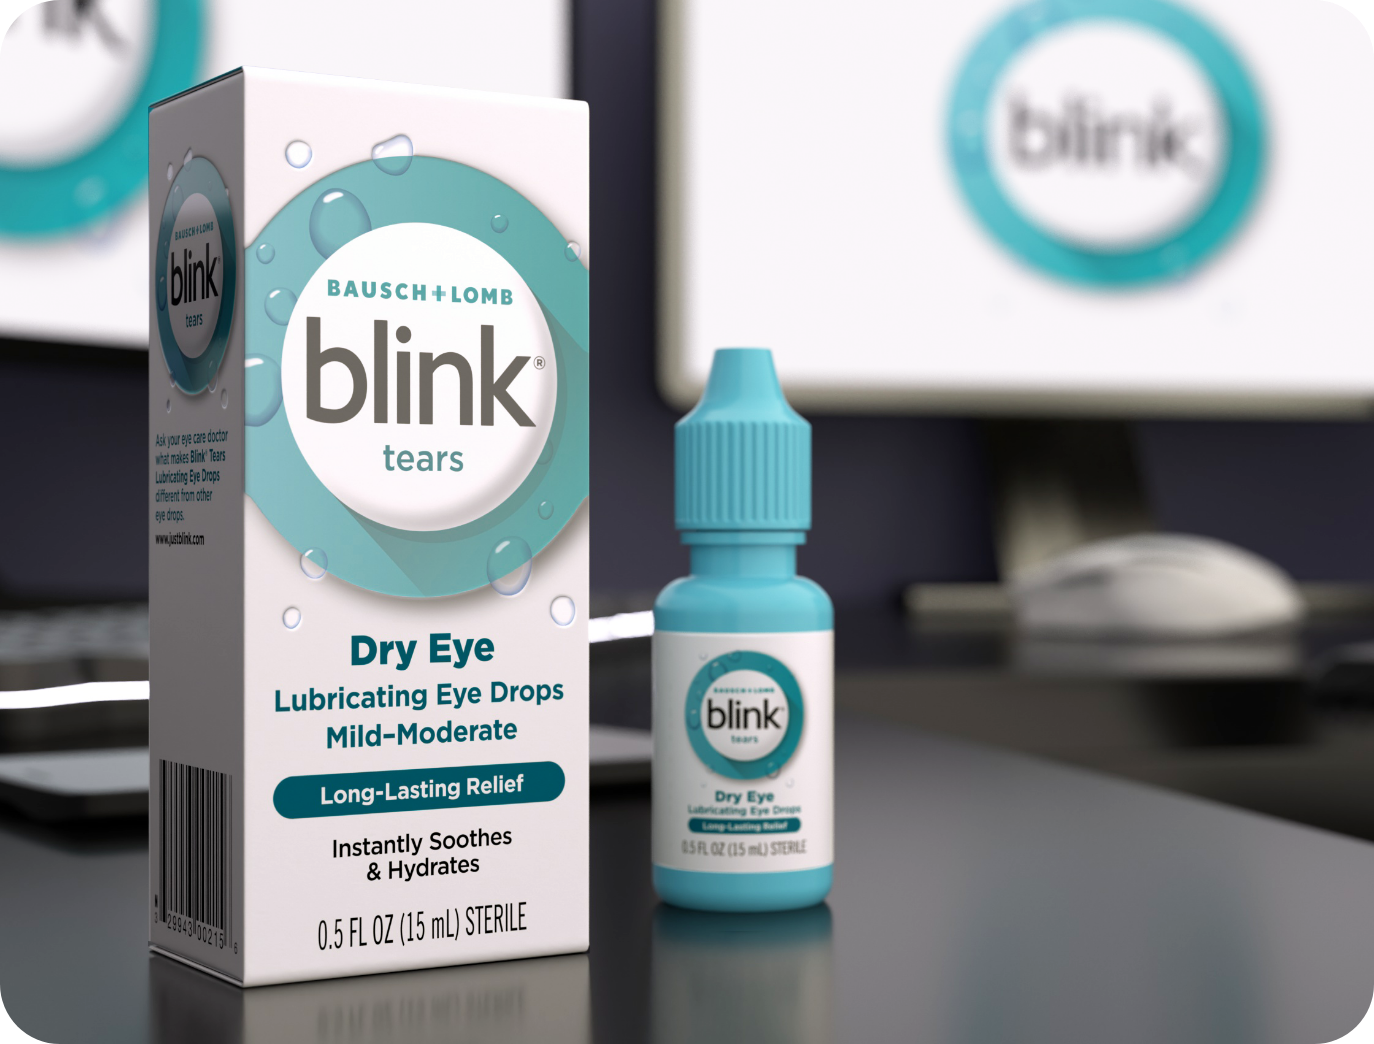 Blink Tears Lubricating Eye Drops bottle and carton on a desk in front of a computer monitor